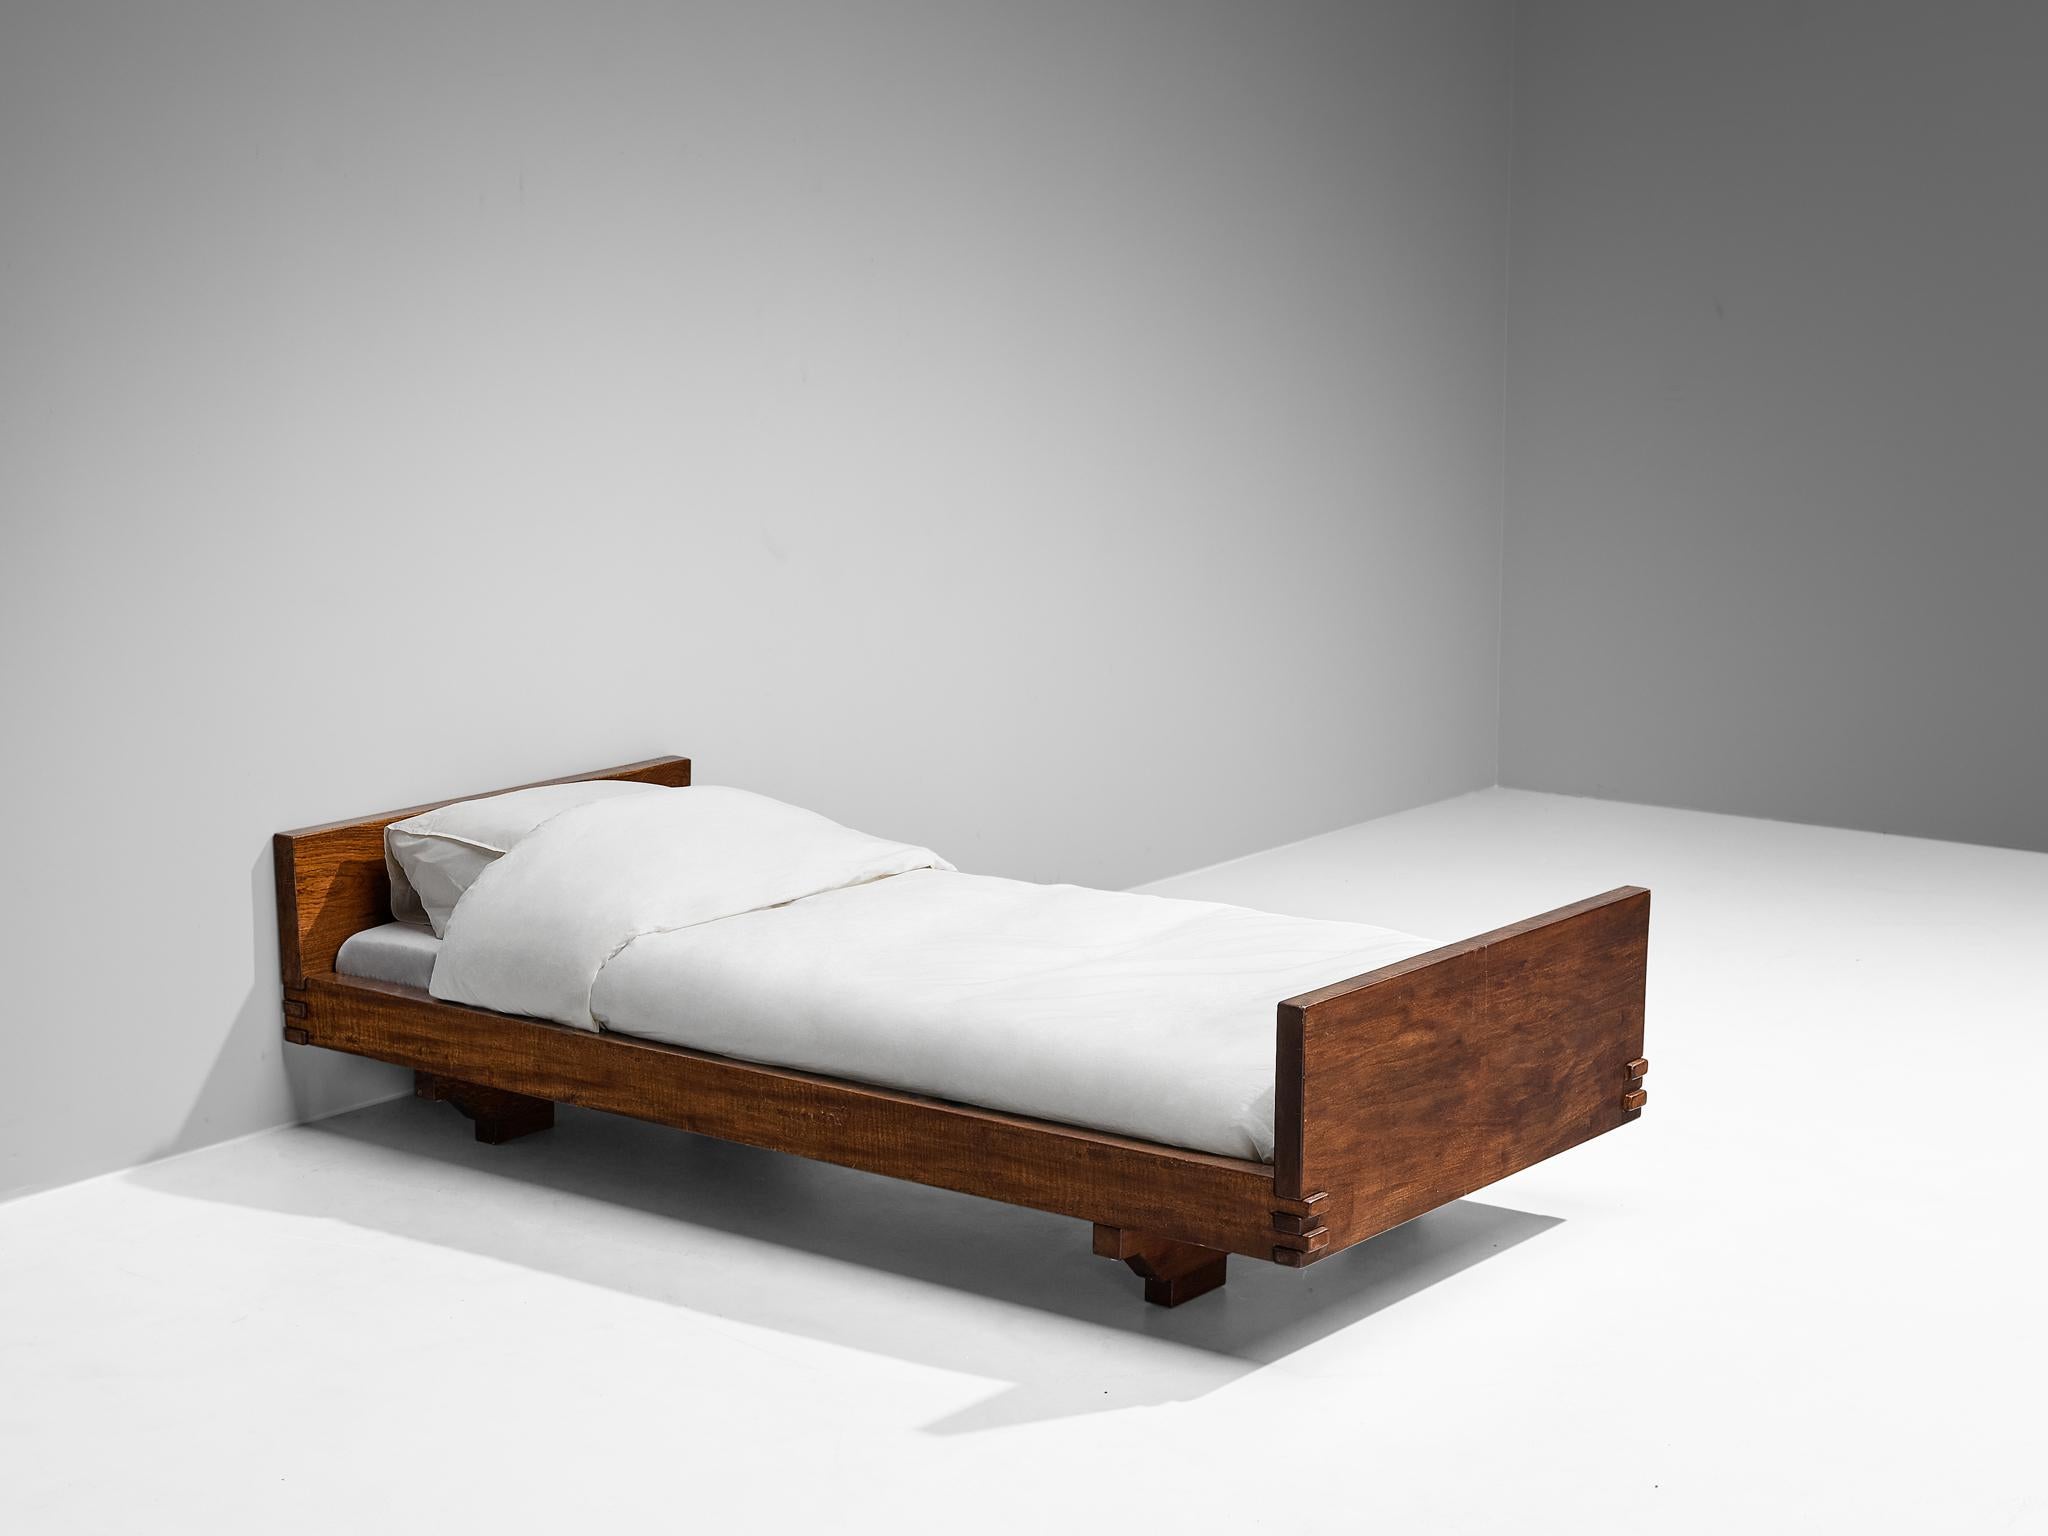 Giuseppe Rivadossi for Officina Rivadossi, bed or daybed, walnut, oak, Italy, 1980s

Giuseppe Rivadossi once again proves his great eye for materialization and technicality this bed is exemplary for. The bed is constructed using wooden panels